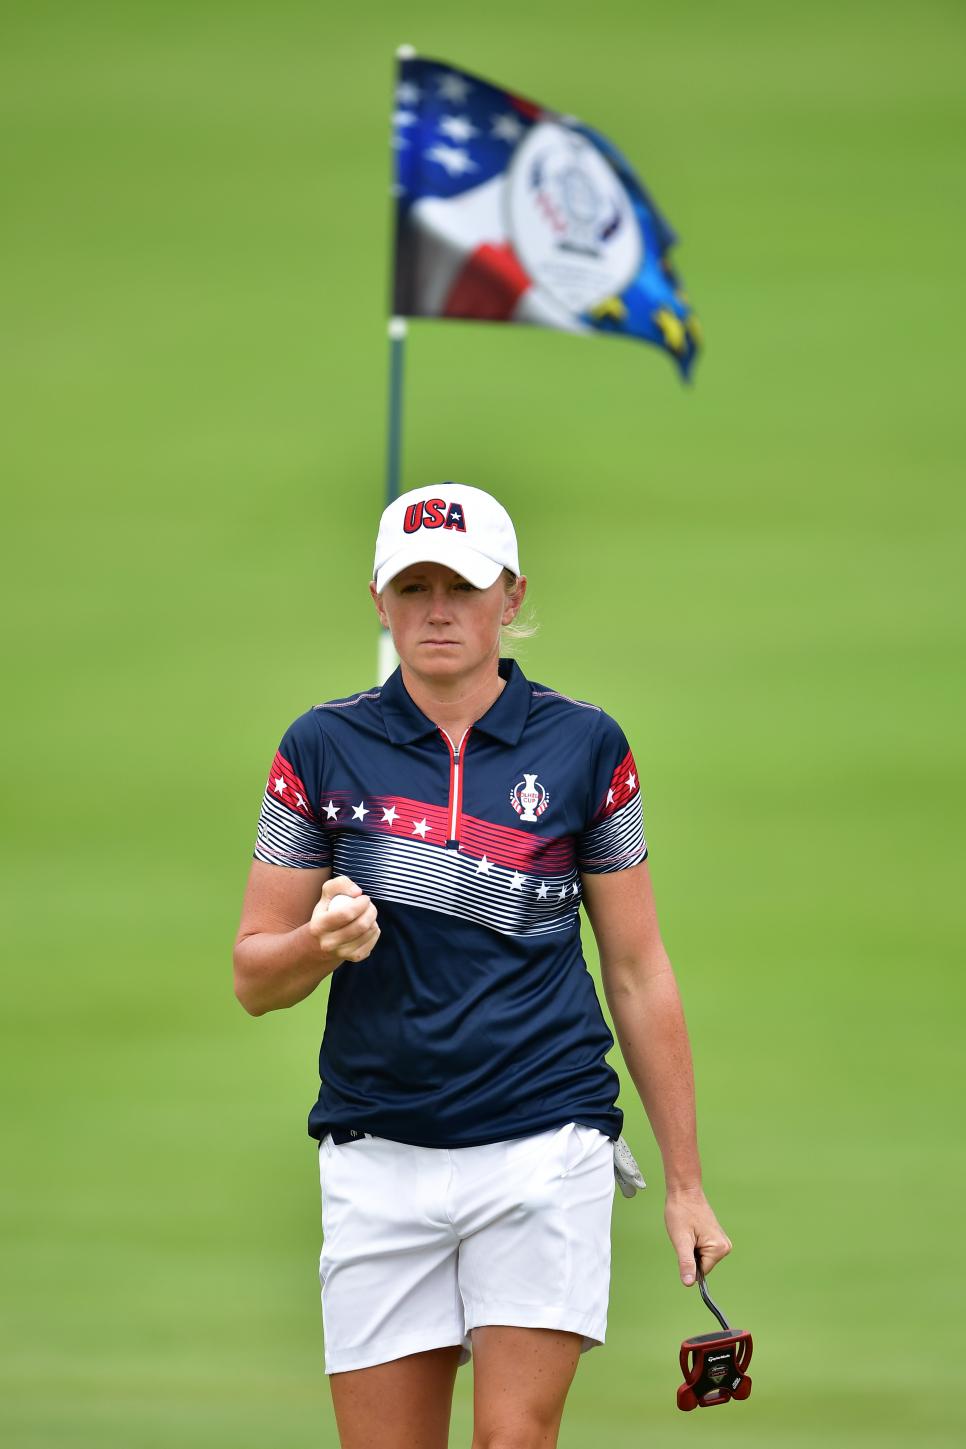 stacy lewis - solheim cup